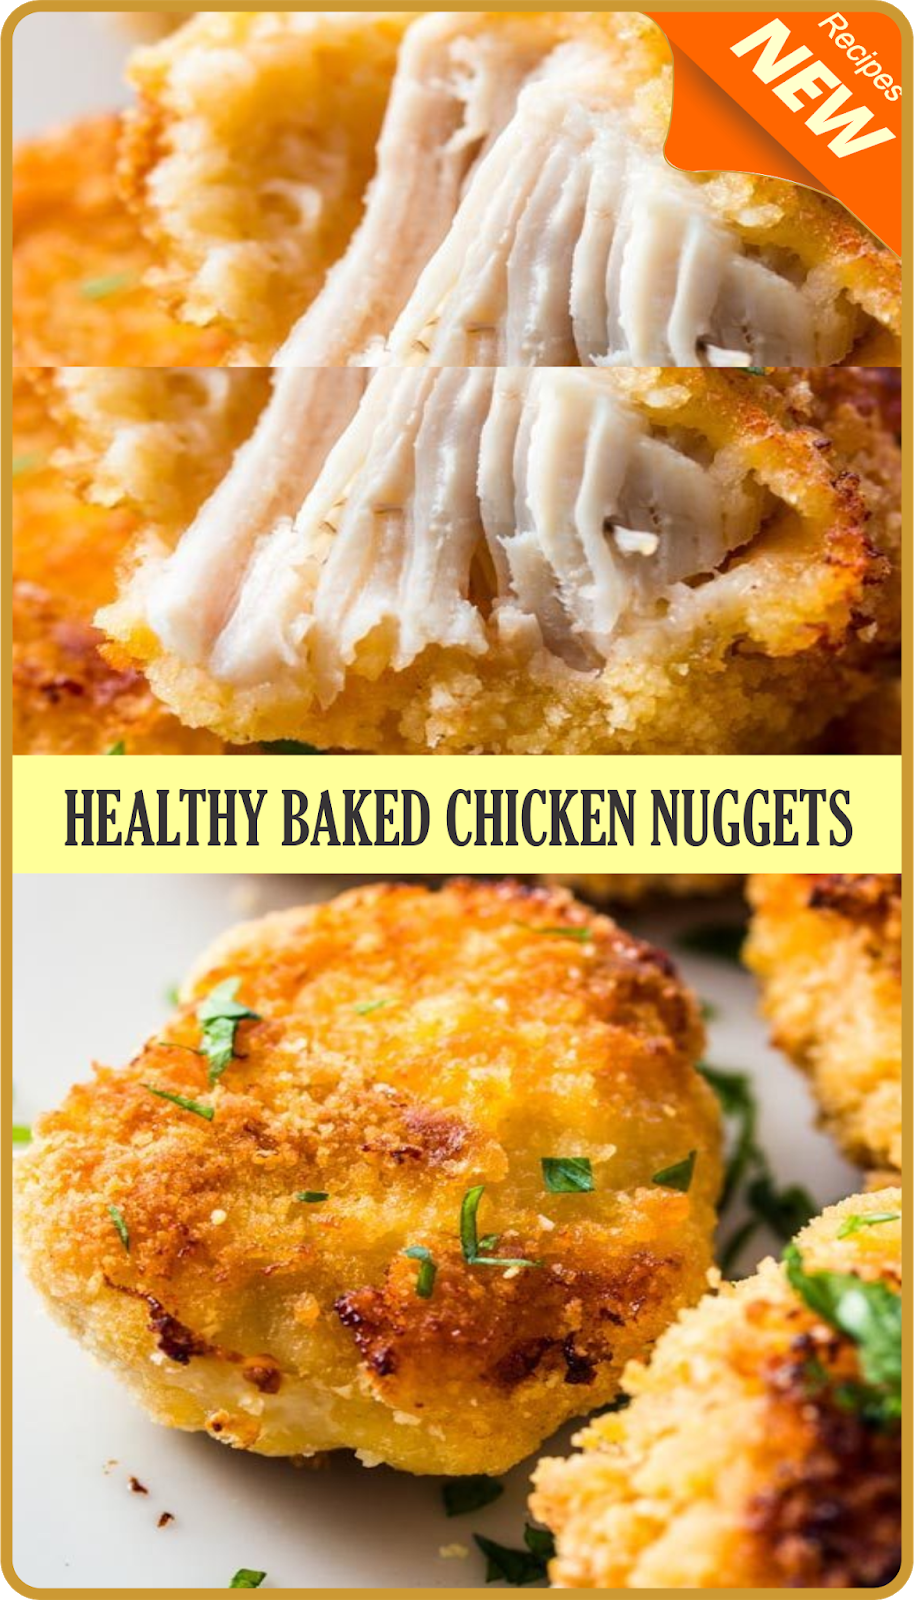 HEALTHY BAKED CHICKEN NUGGETS RECIPE | Amzing Food